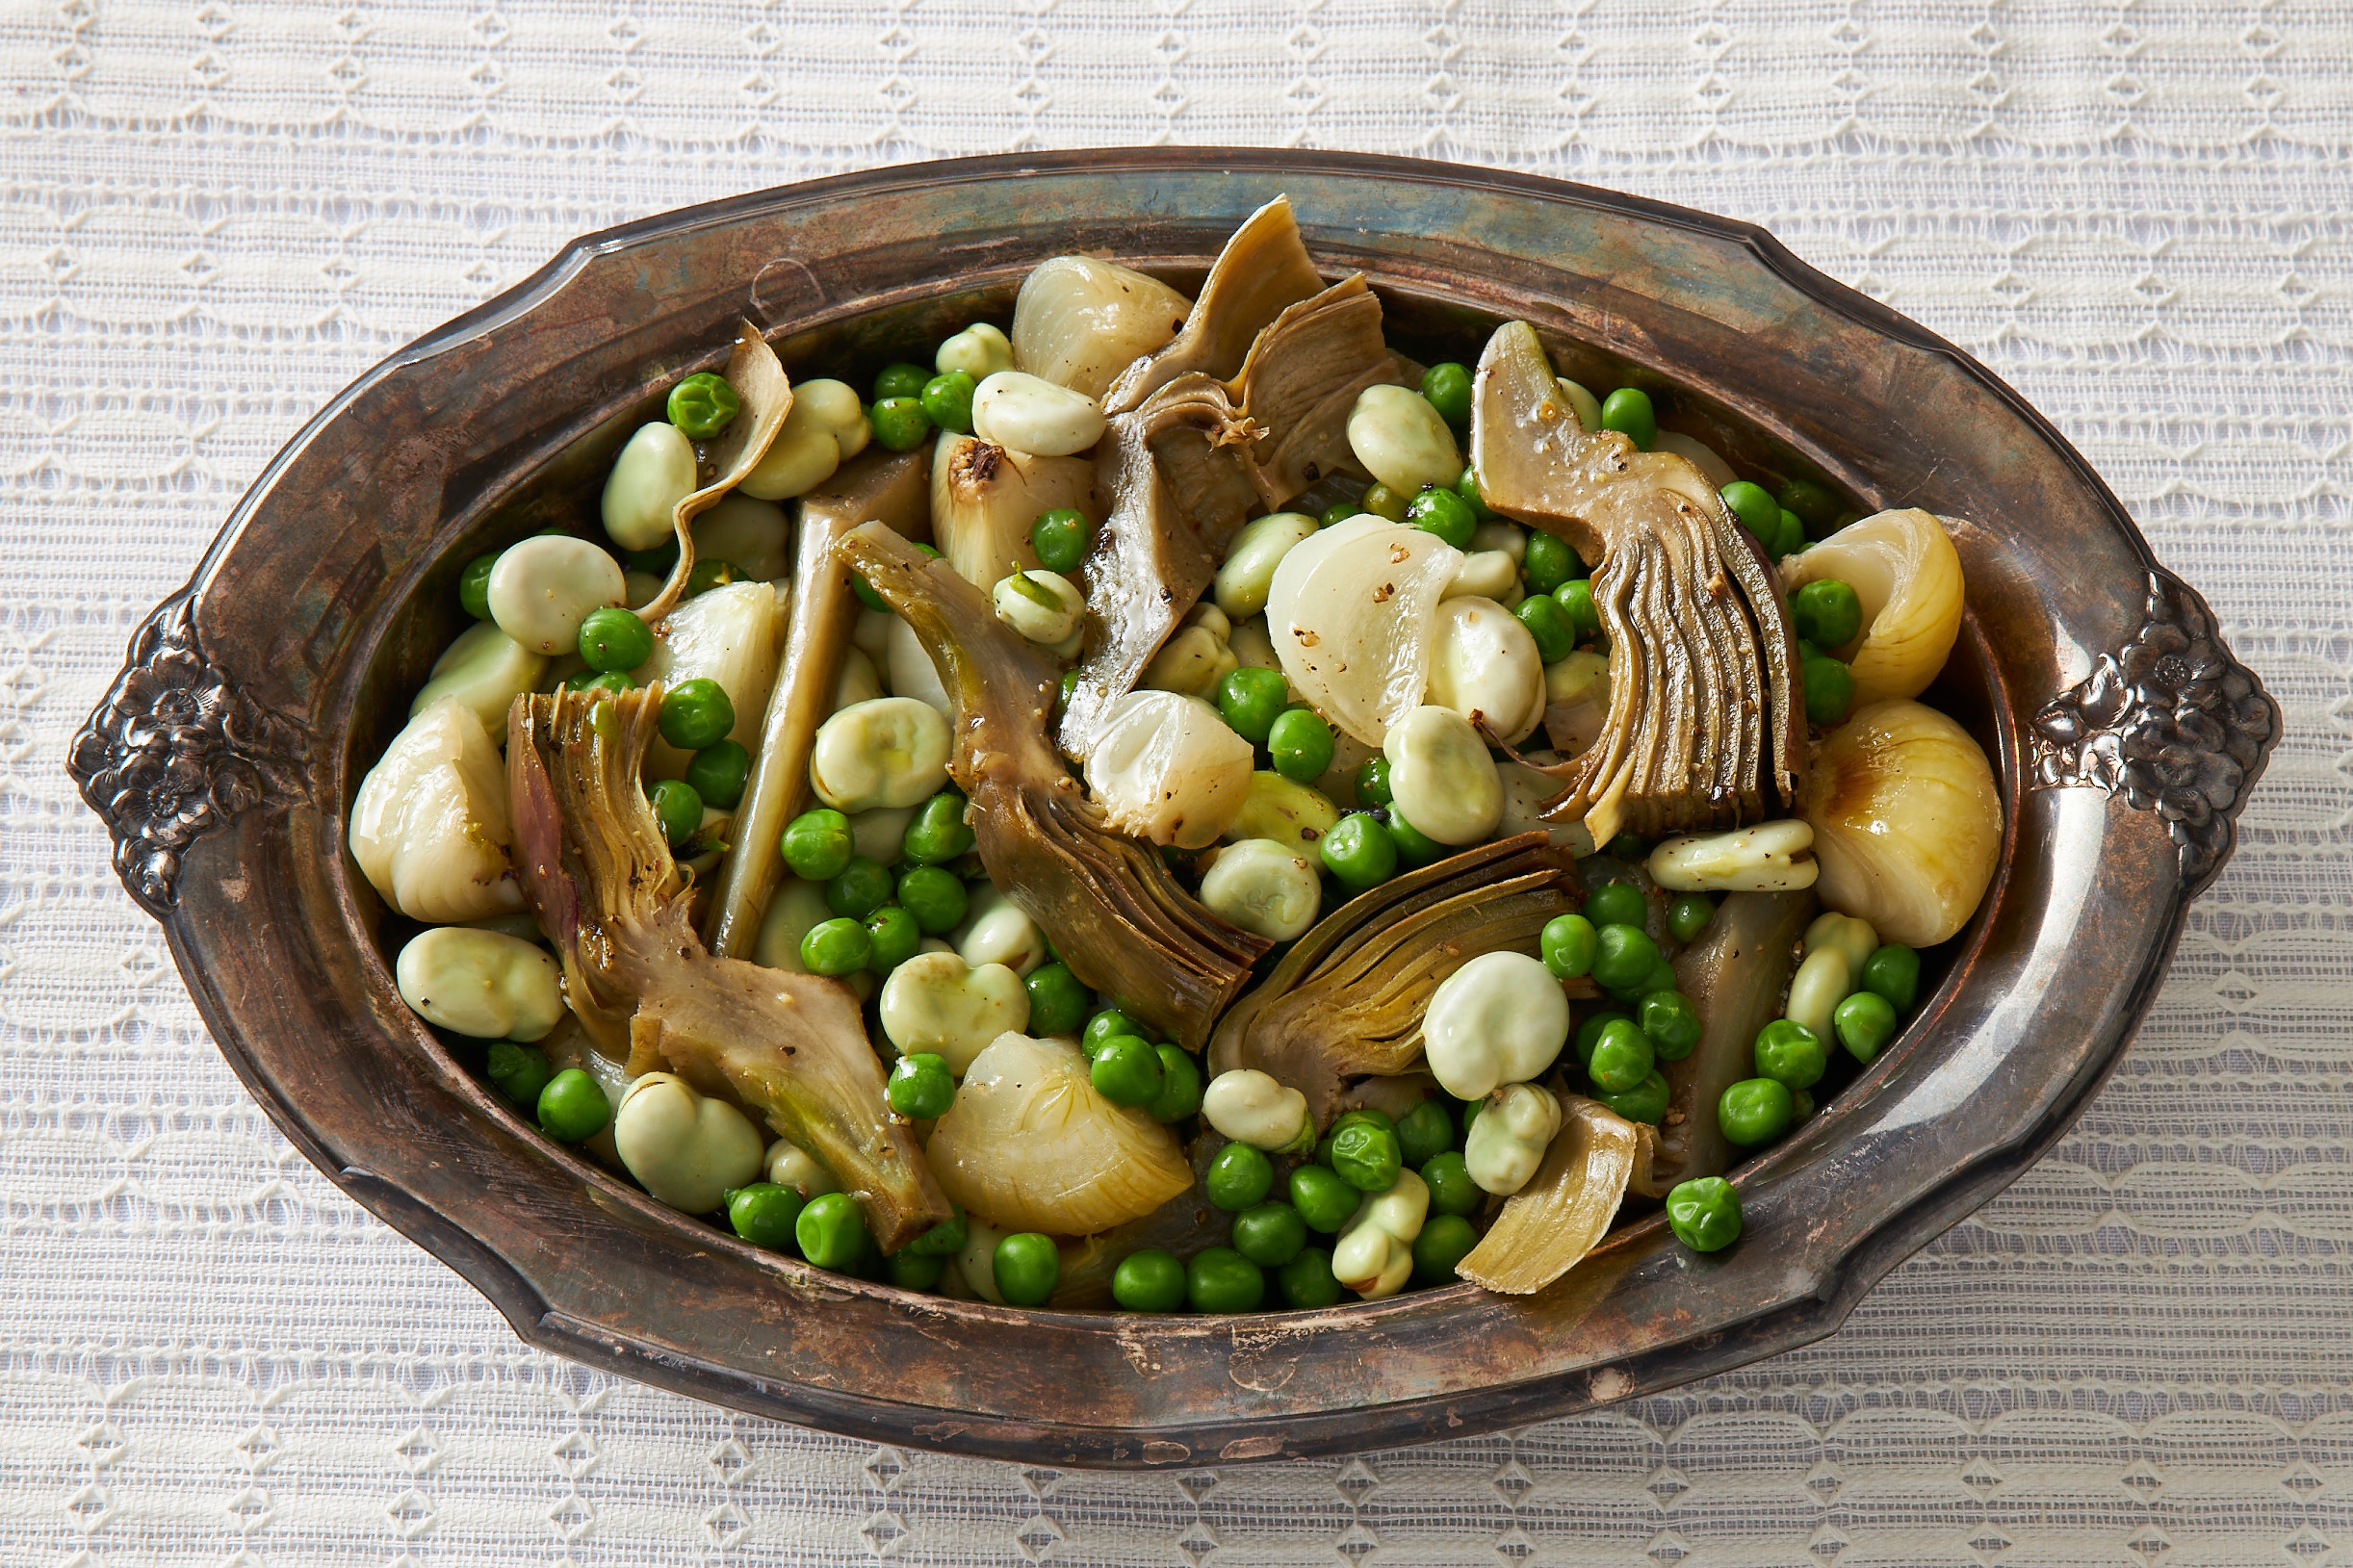 Braised artichokes, peas, fava beans and onions in metal bowl